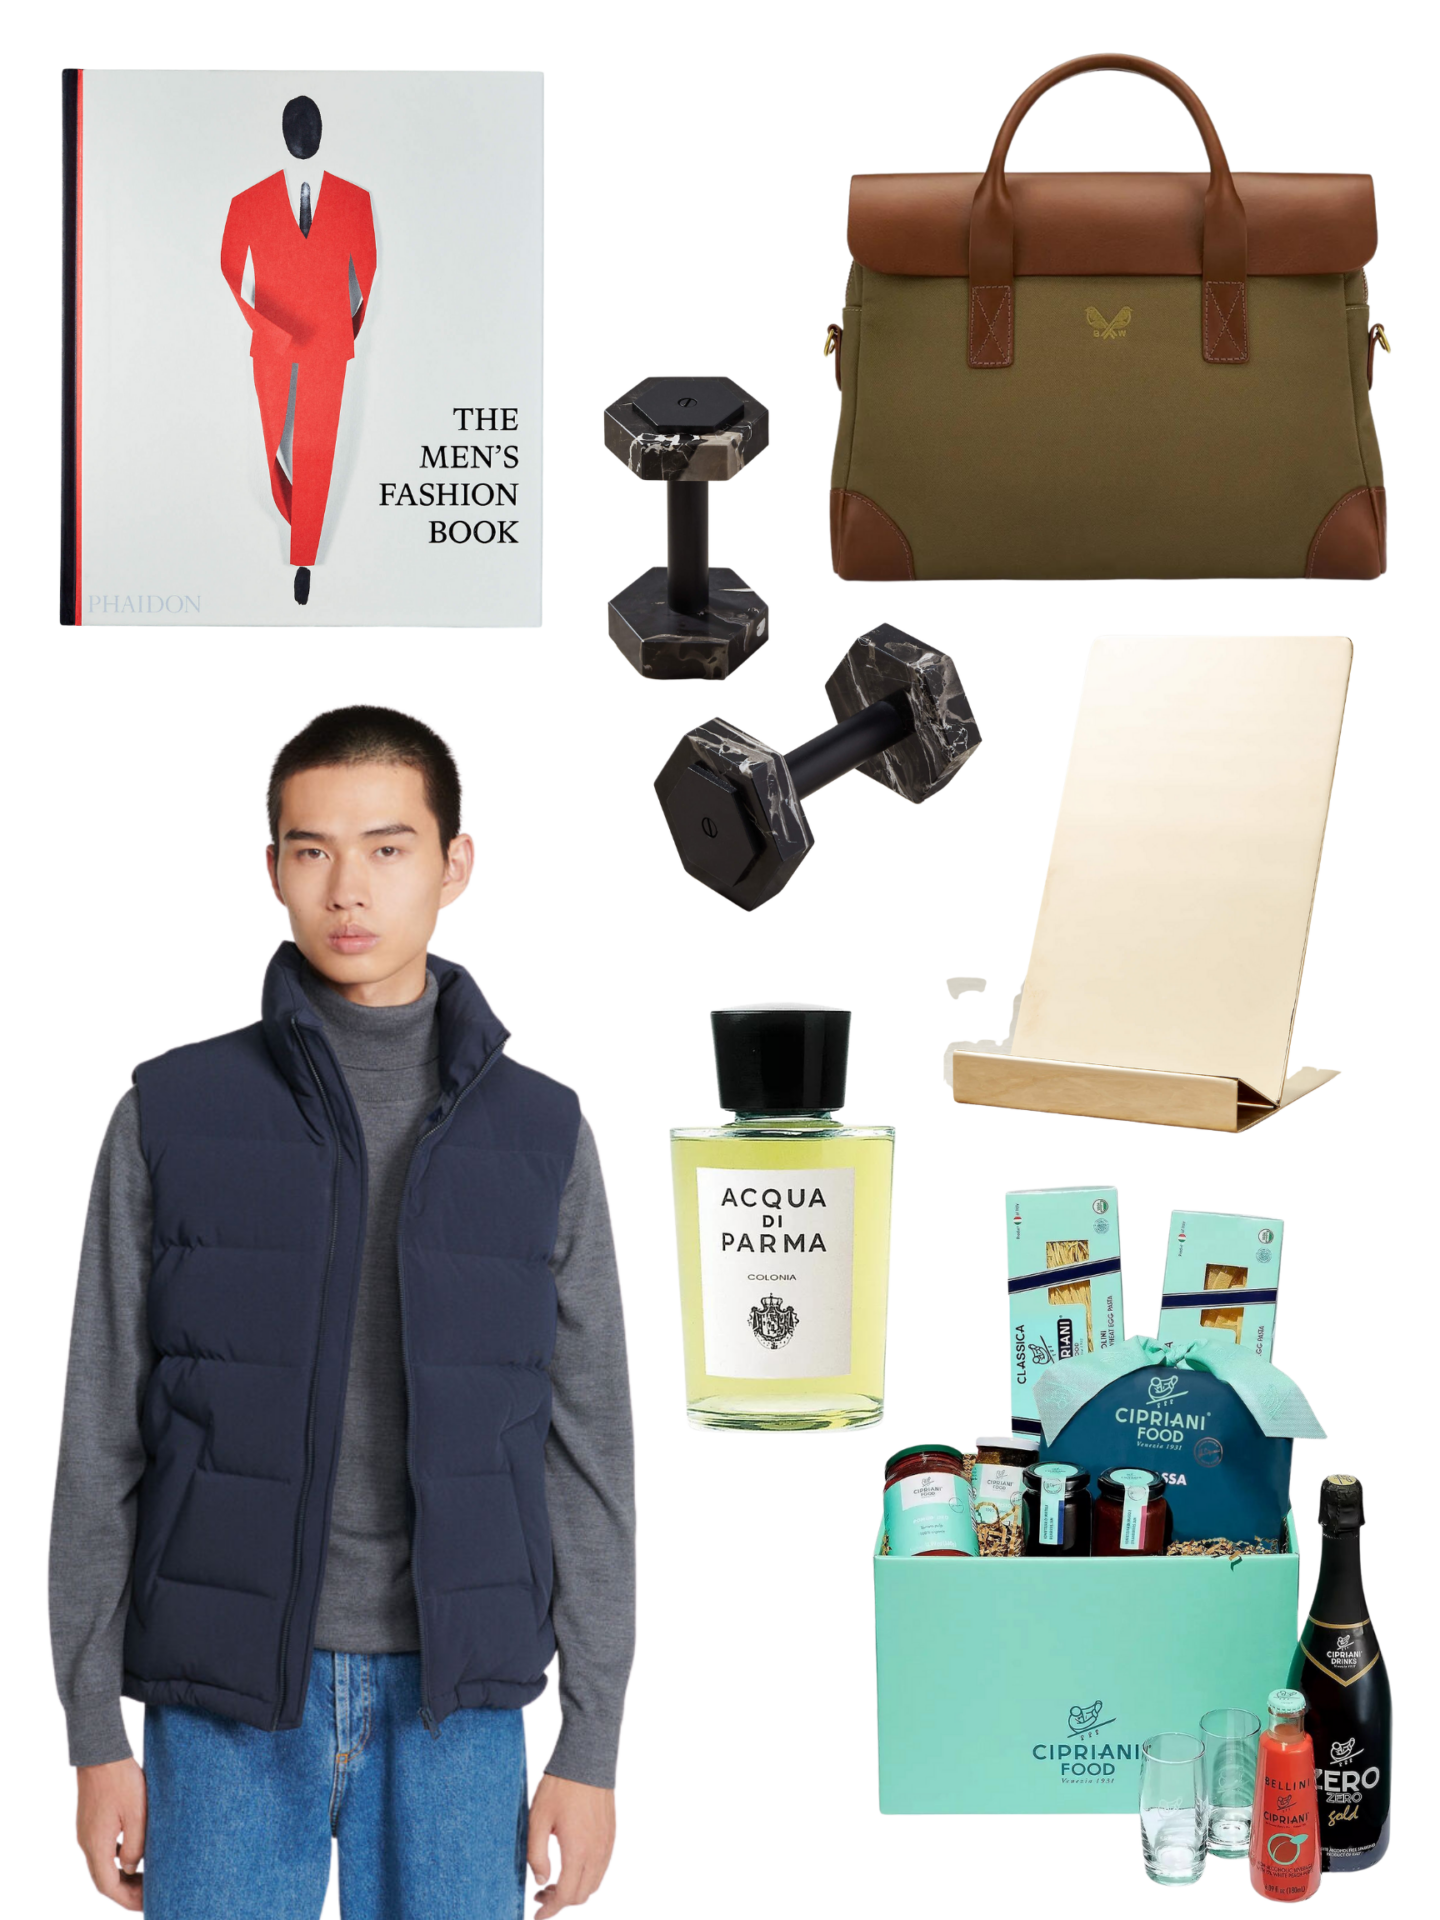  Sandro puffer vest and turtleneck, CB2 Marble Dumbell set and Brass Book Stand, Cipriani Artisanal Food Basket, Aqua Di Parma Cologne, The Men's Fashion Book and Todd Snyder Laptop Bag